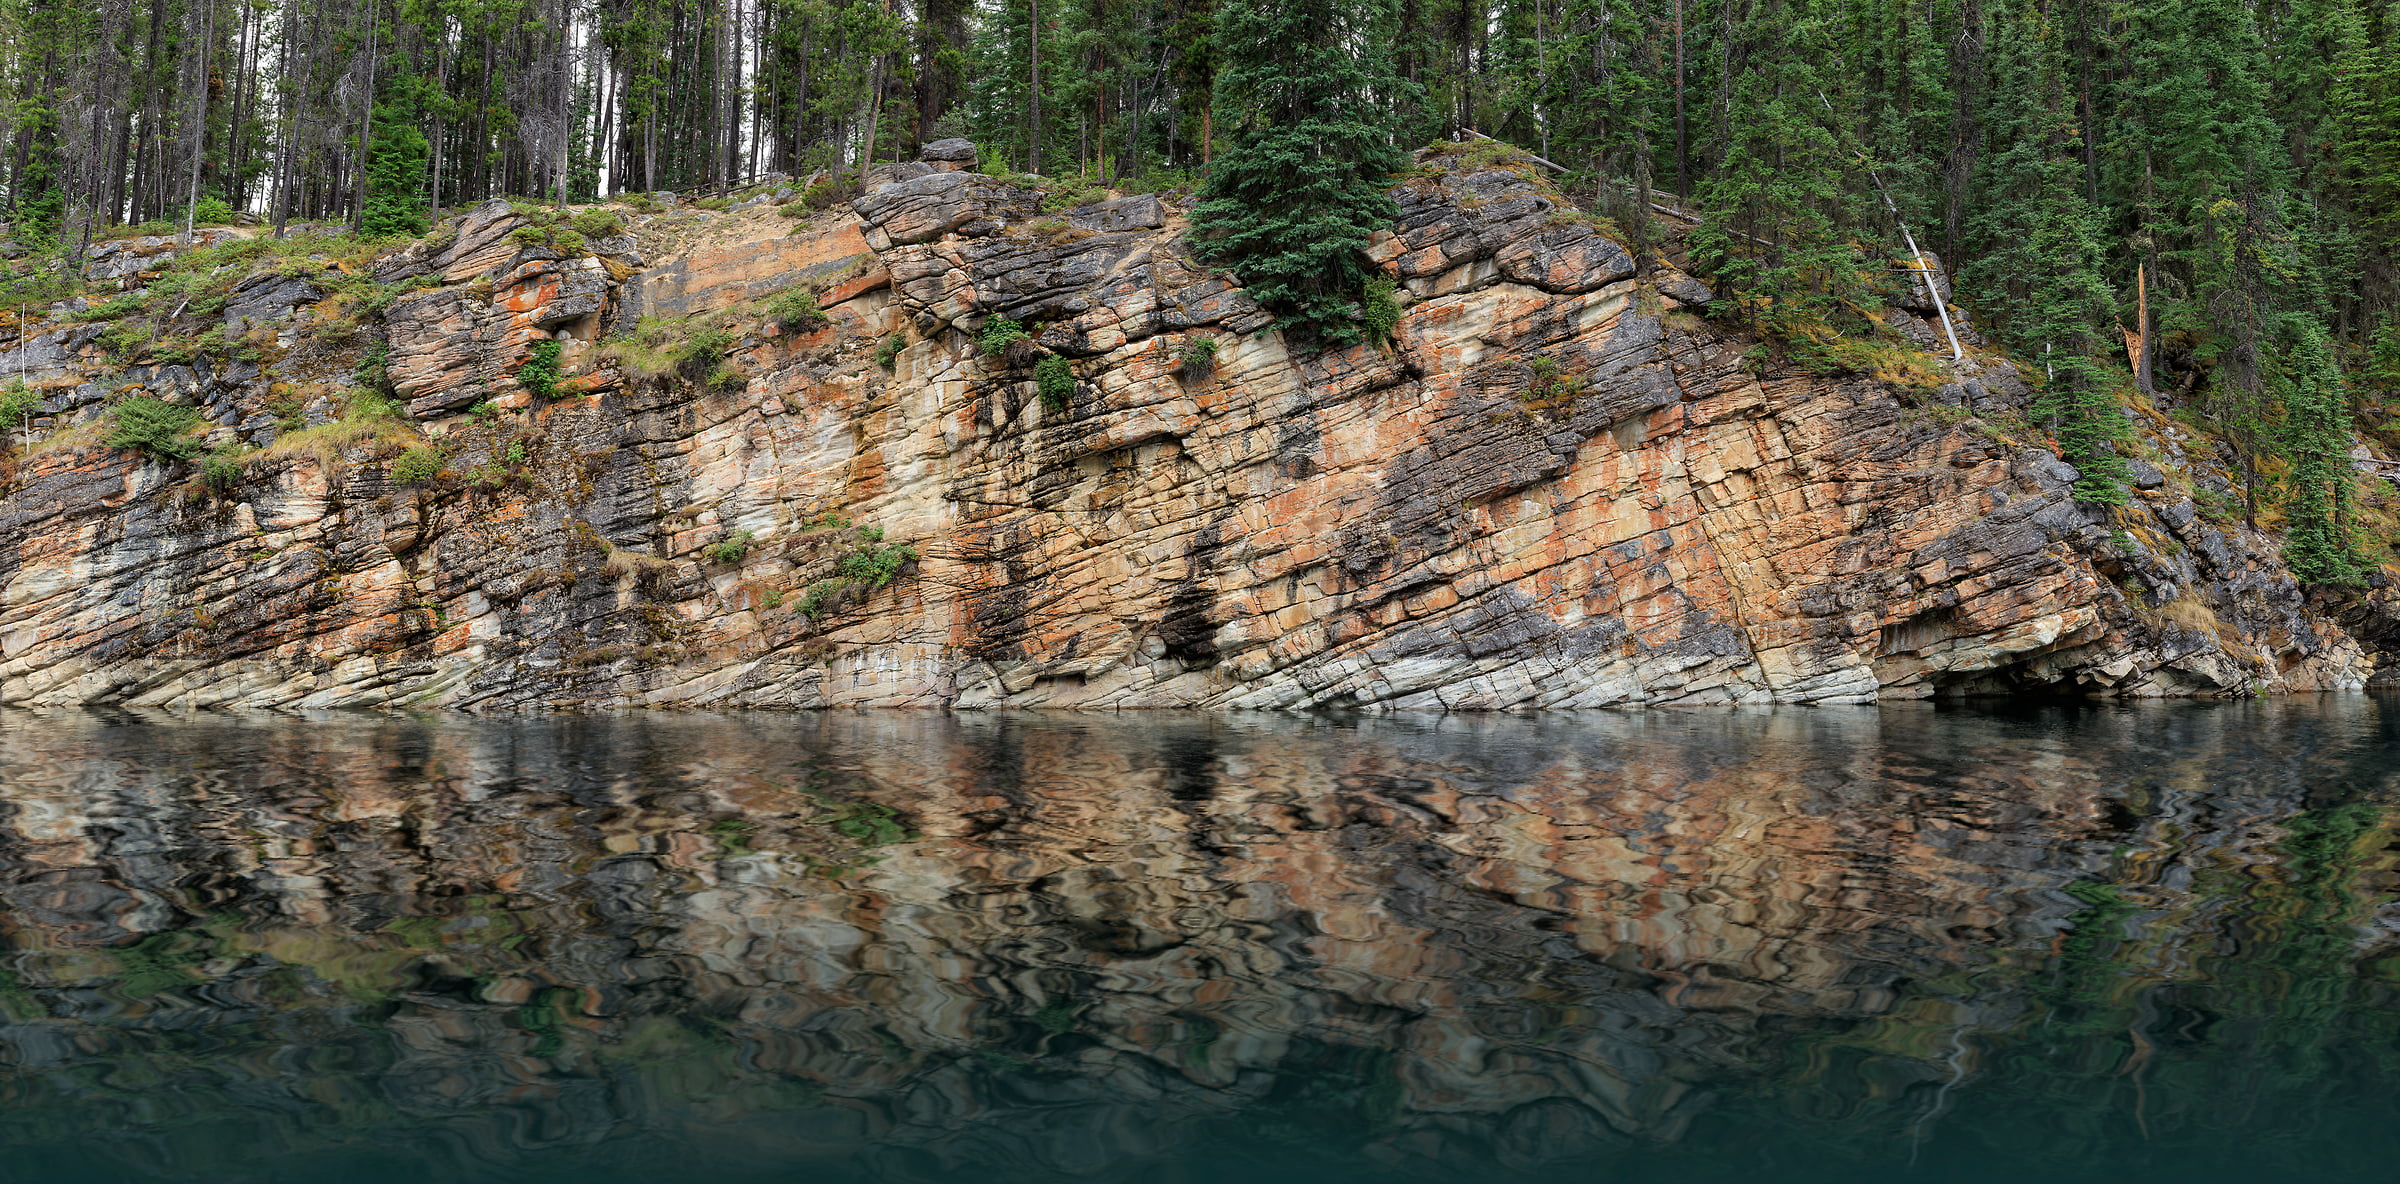 3,135 megapixels! A very high resolution, large-format photo of a rock wall, a calm lake, and an evergreen forest; nature photograph created by Scott Dimond at Horseshoe Lake in Jasper National Park, Alberta, Canada